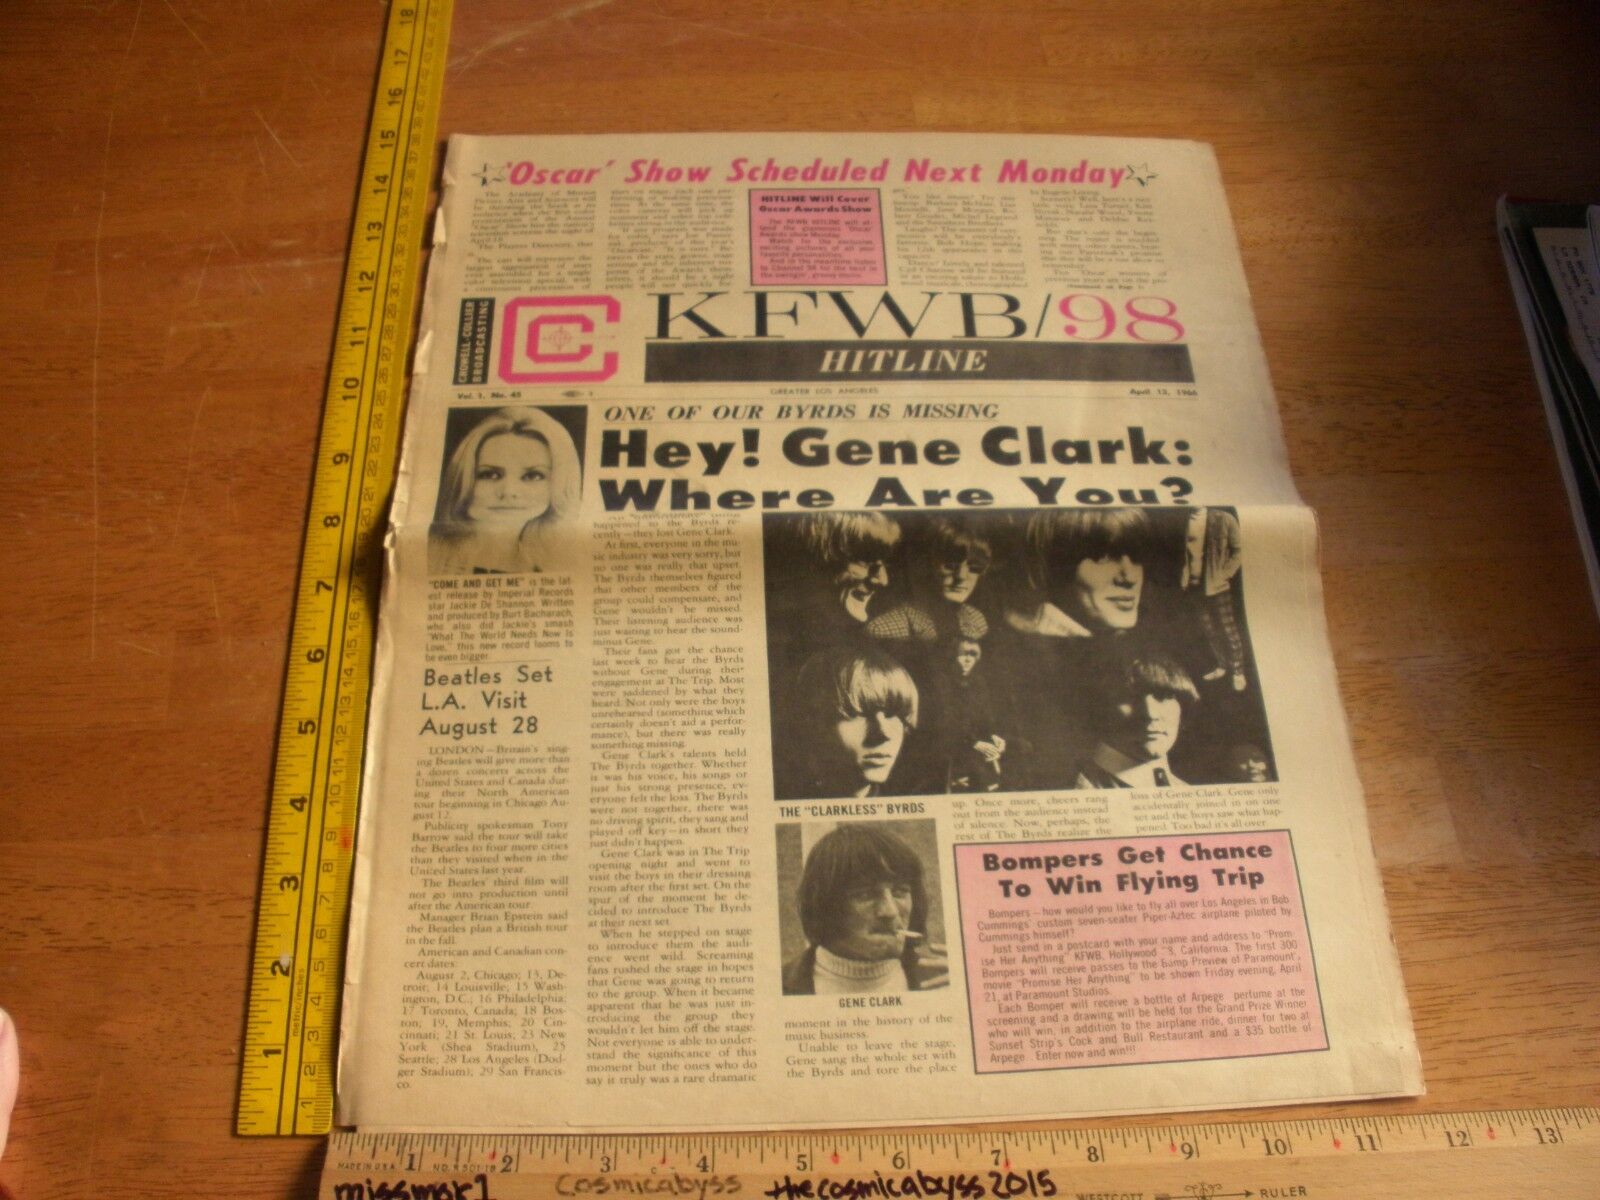 1966 Oscars The Byrds KFWB/98 Los Angeles paper James Brown The Who Gene Clark